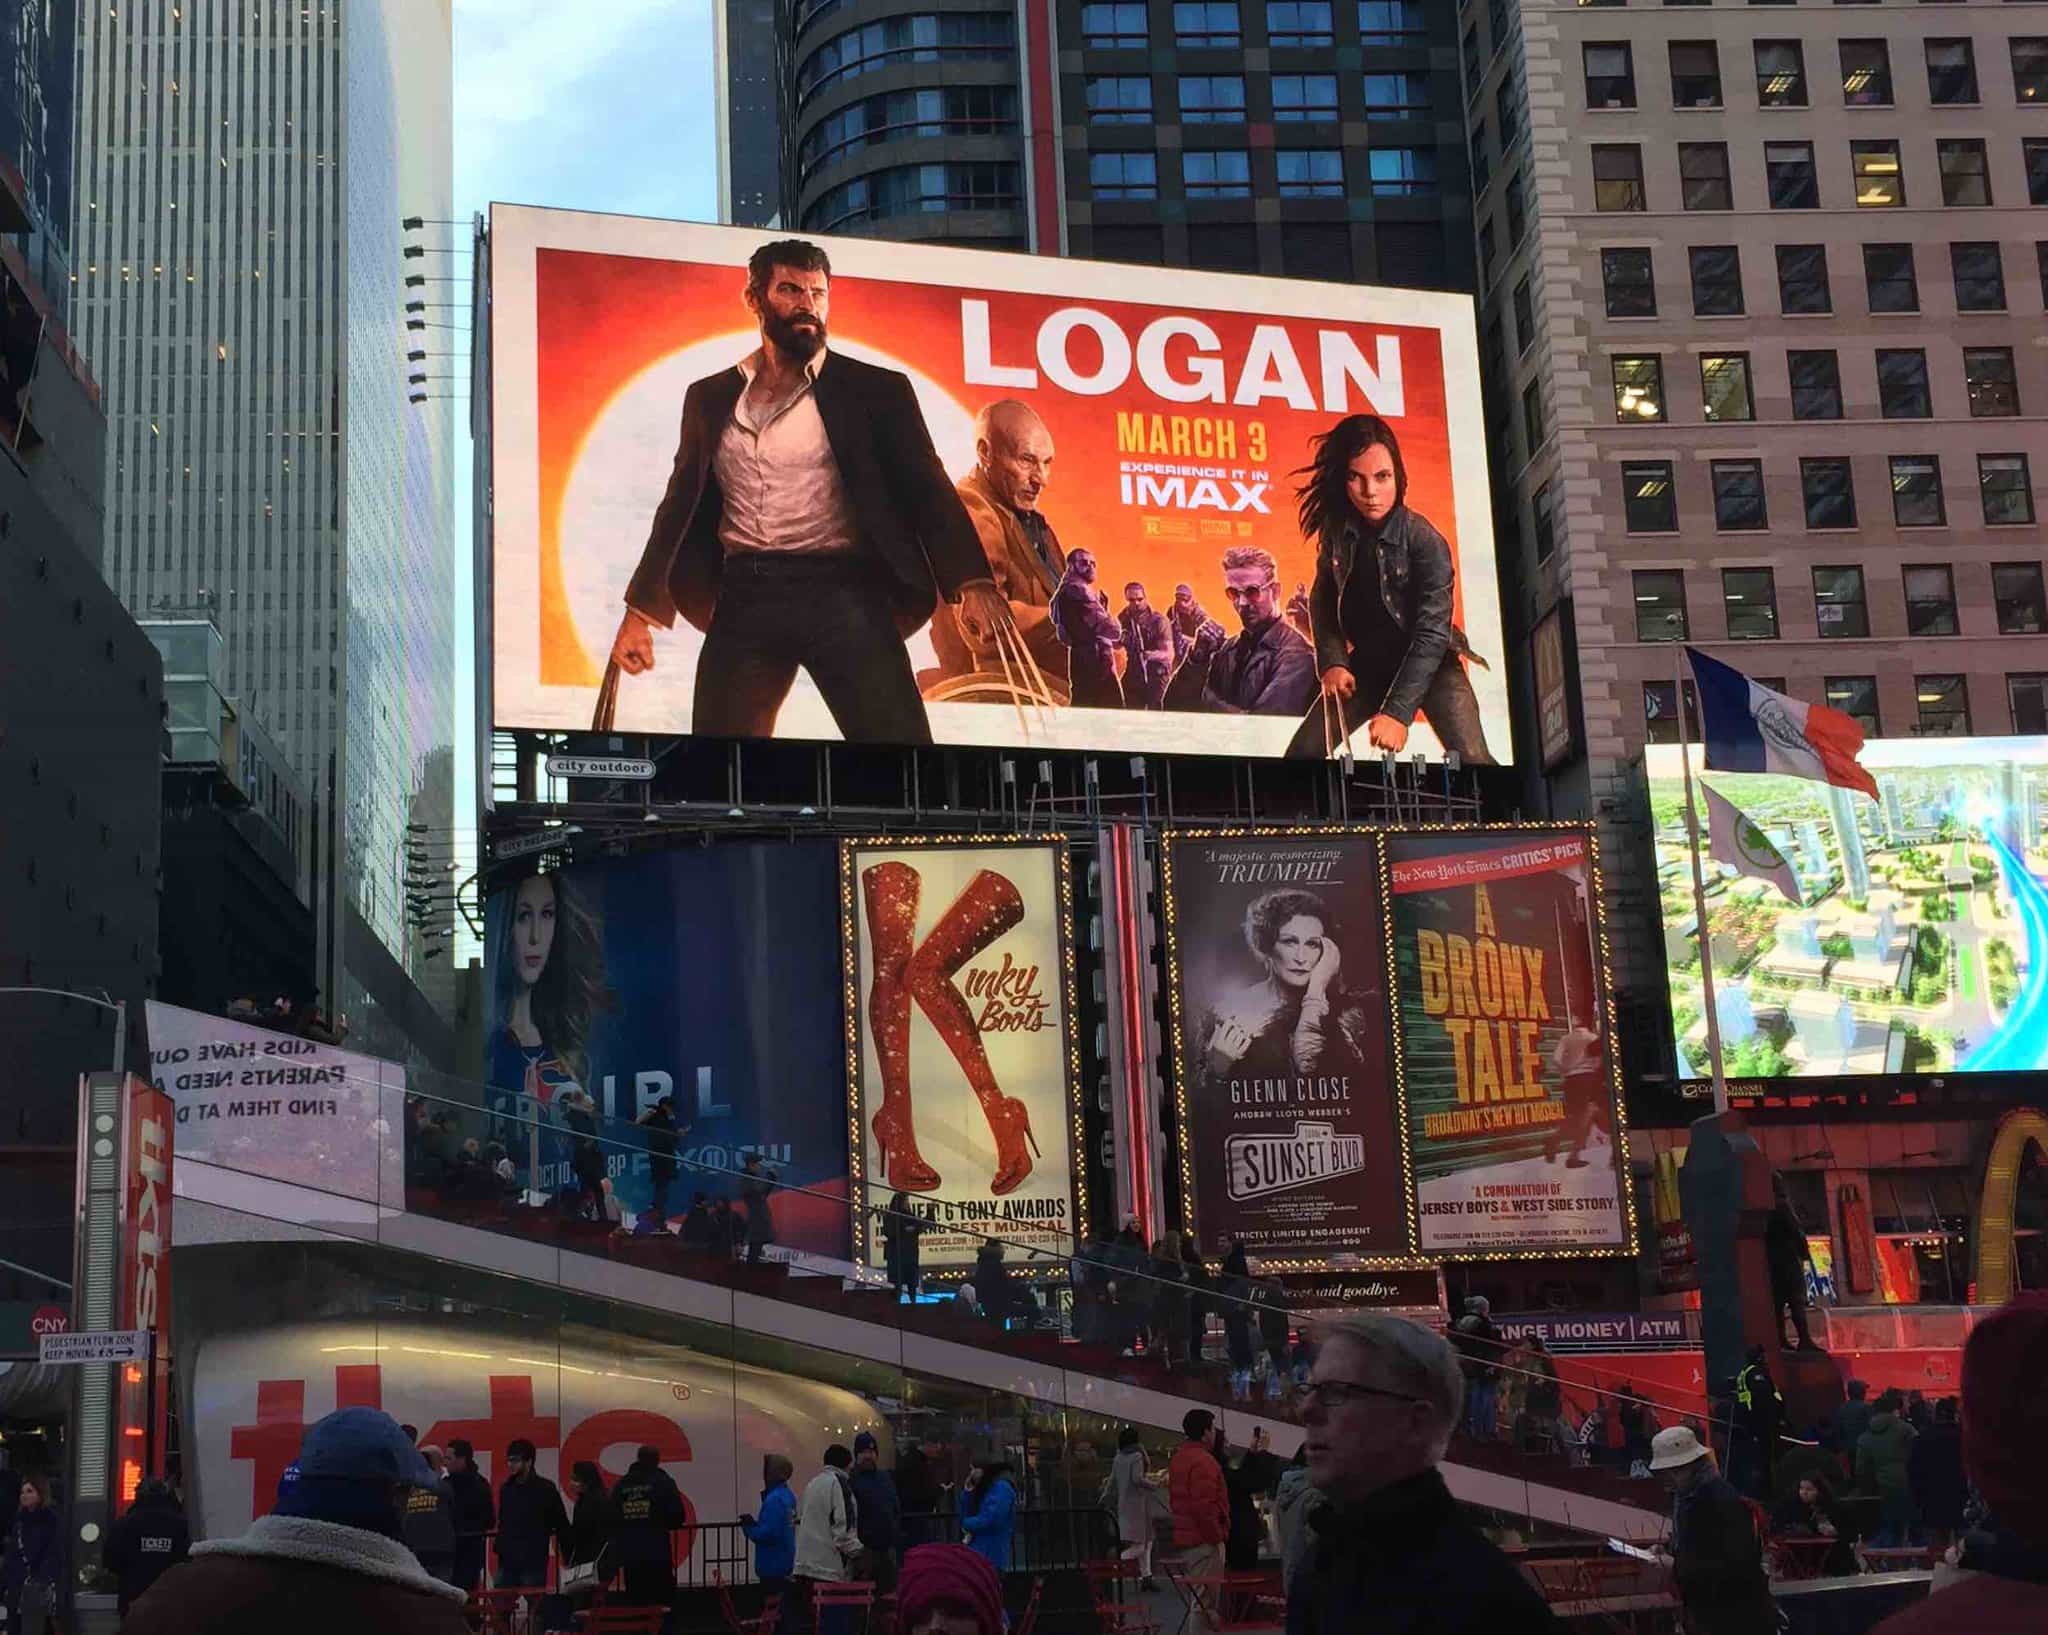 This Logan promo poster clawed its way from an iPad Pro to New York City's Times Square.